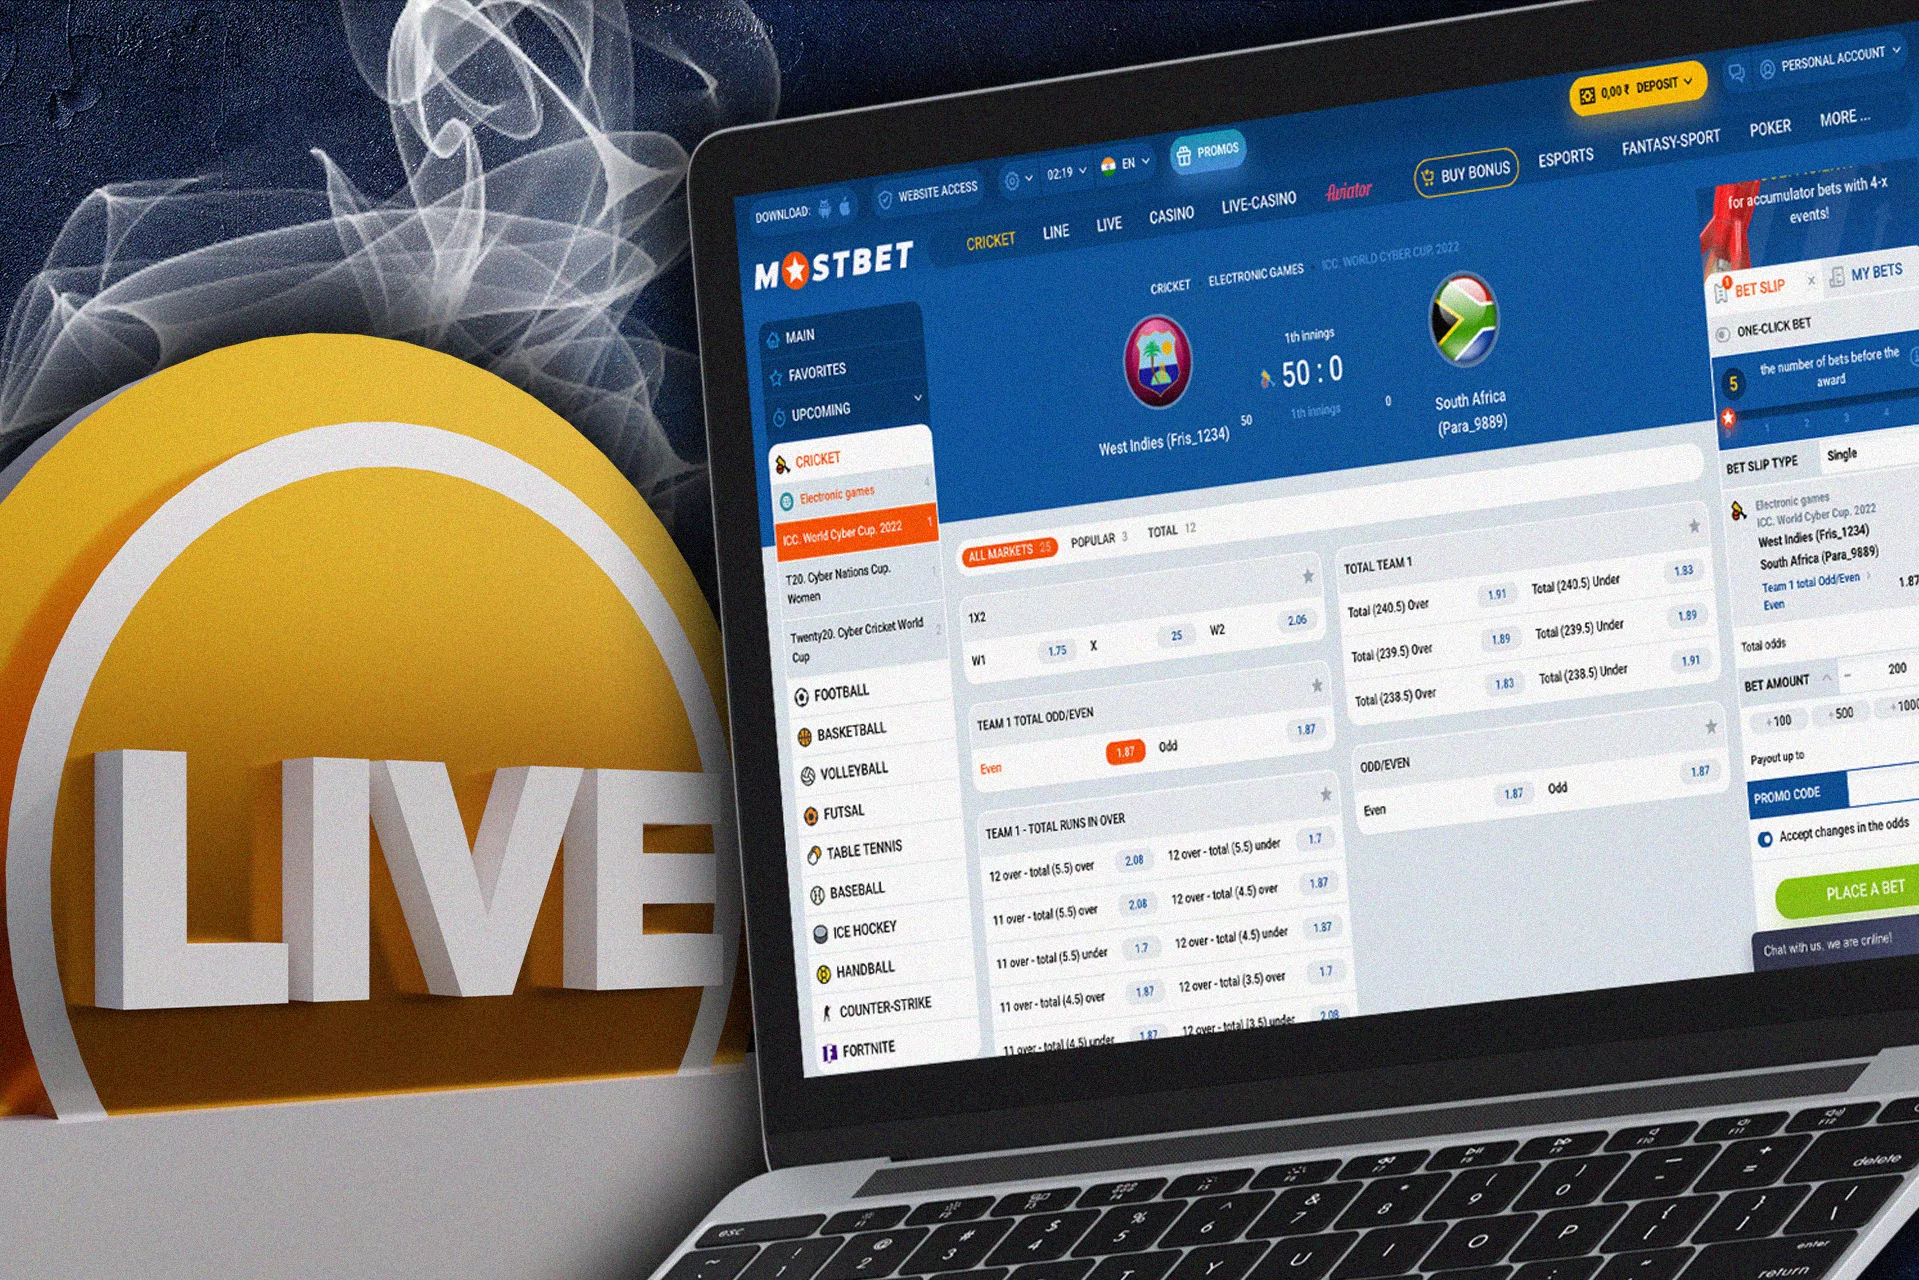 Watch live streamings and place bets at Mostbet.